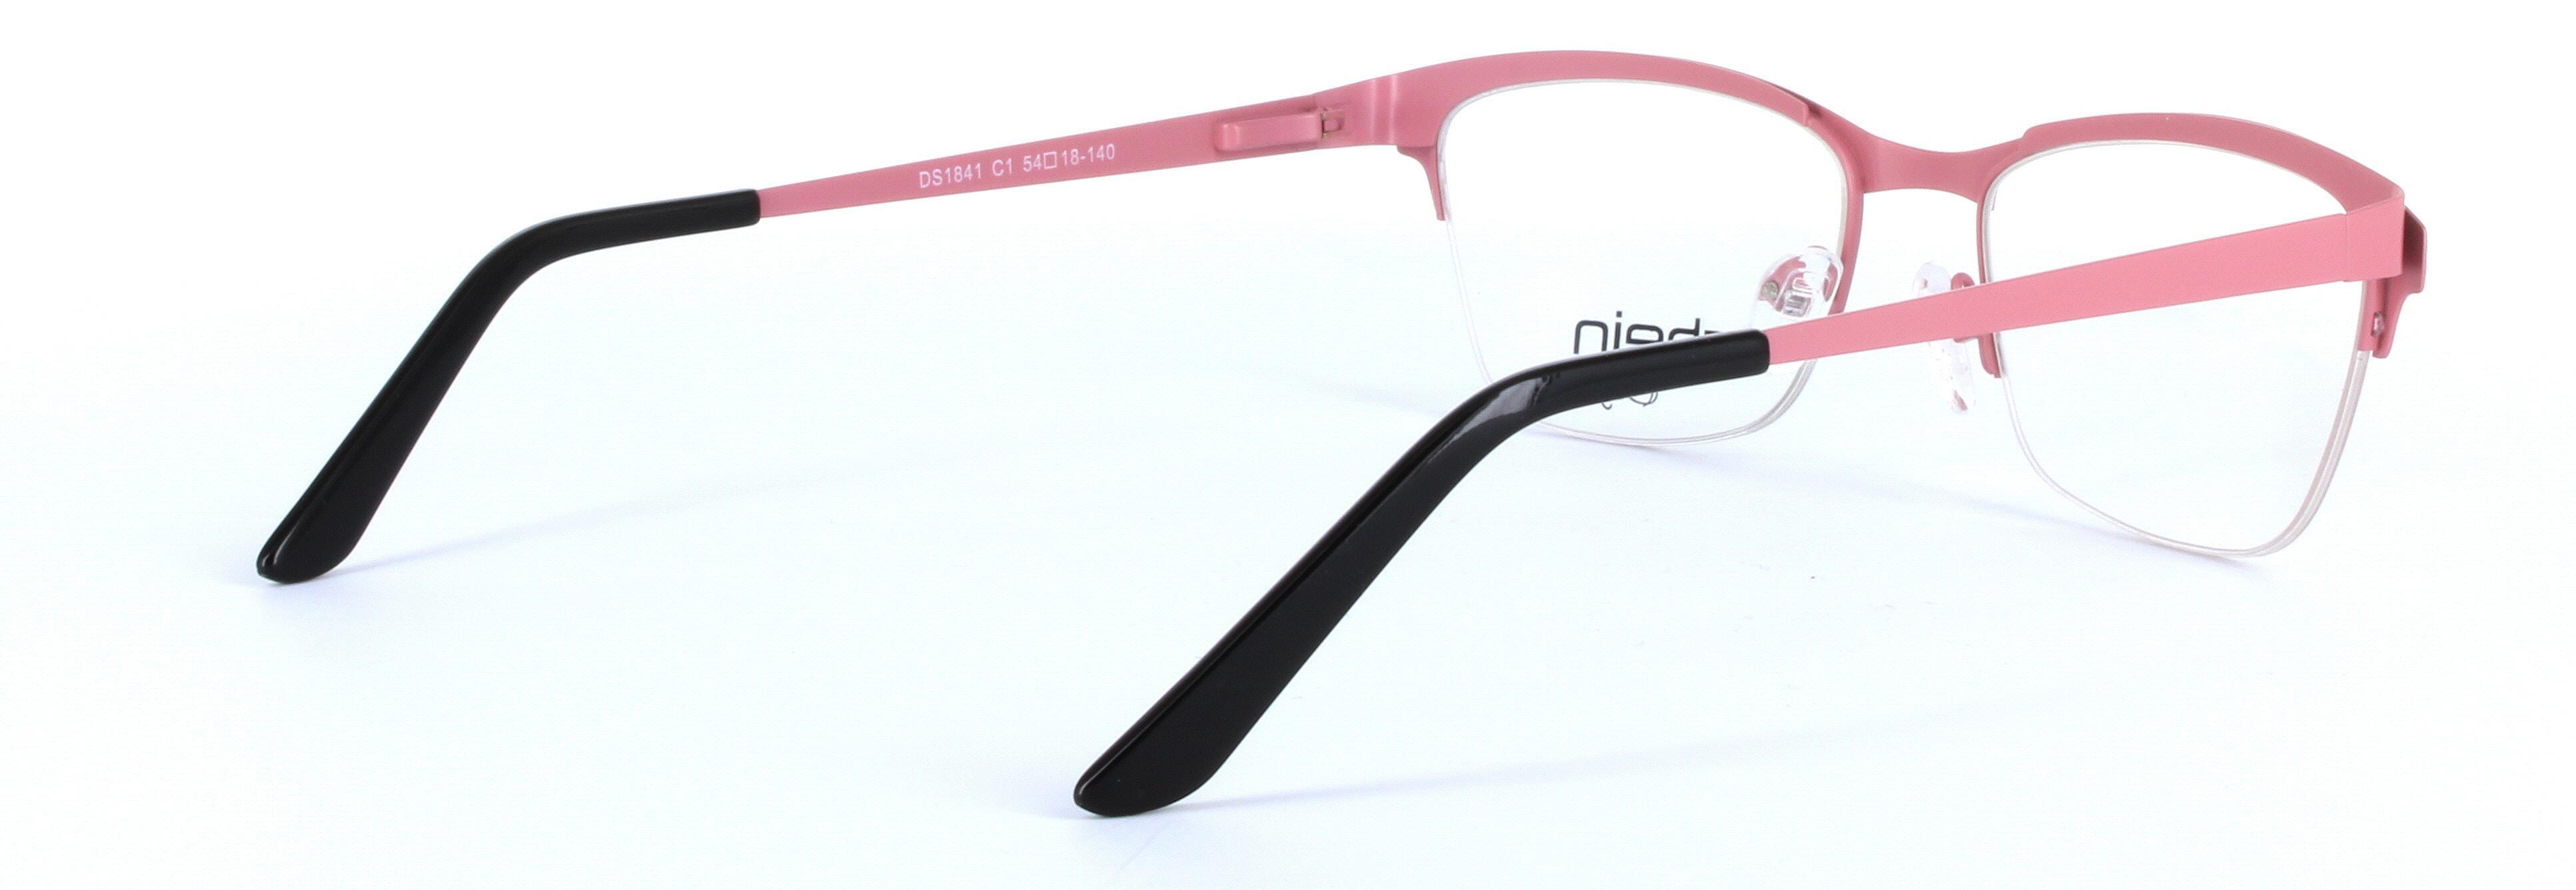 Andrea Black and Pink Semi Rimless Oval Metal Glasses - Image View 4